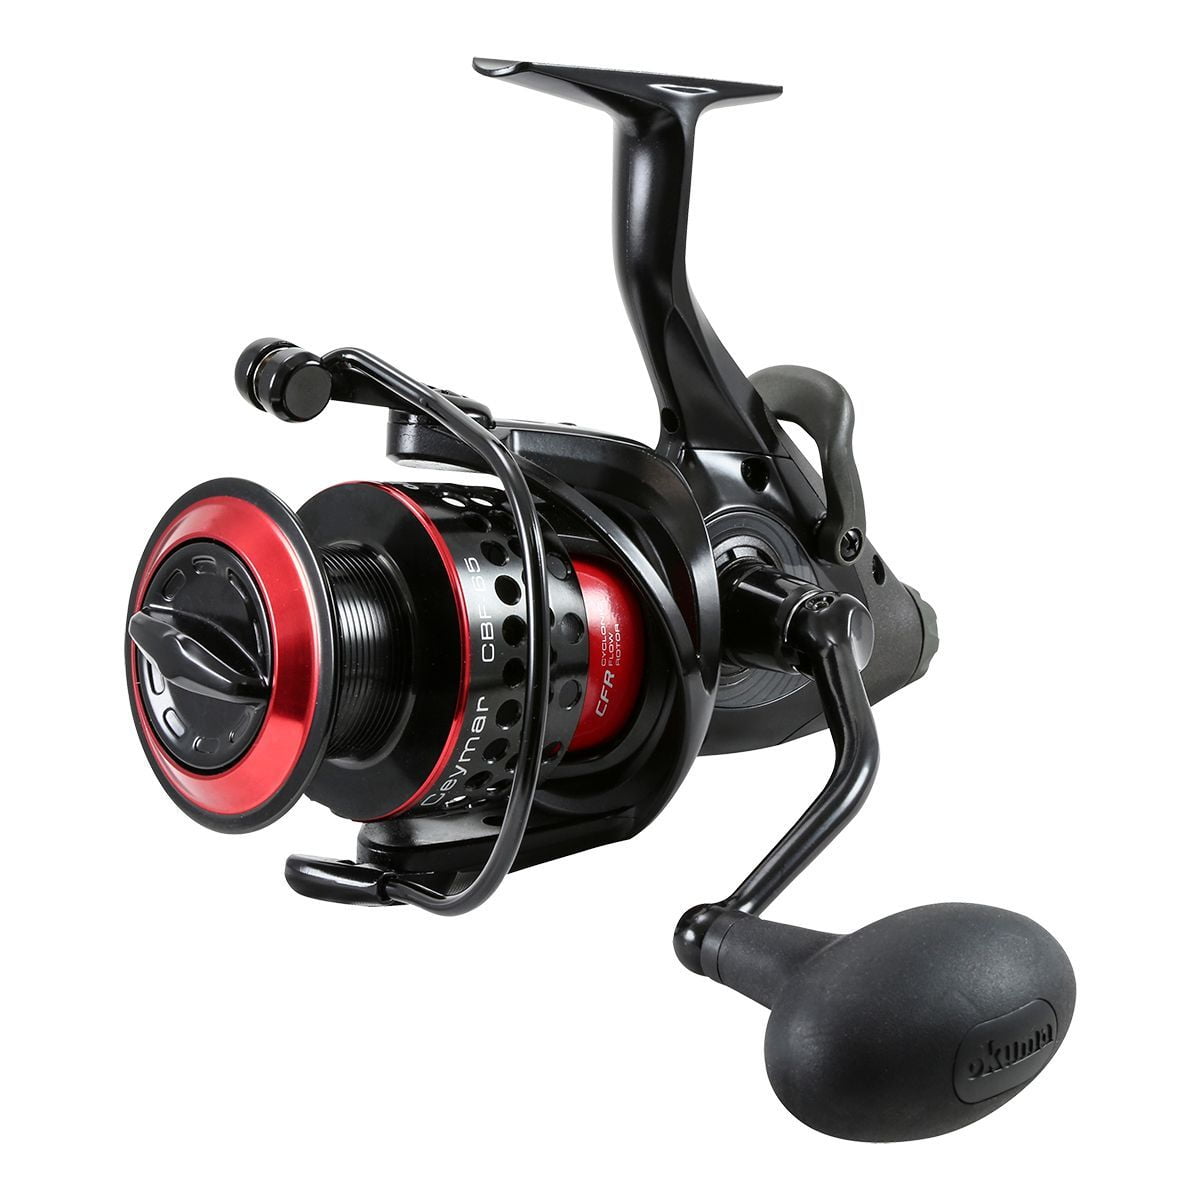 CANDO(SUB-Brand of TICA) Spinning Fishing Reel,7BB+1RB Smooth,Gear